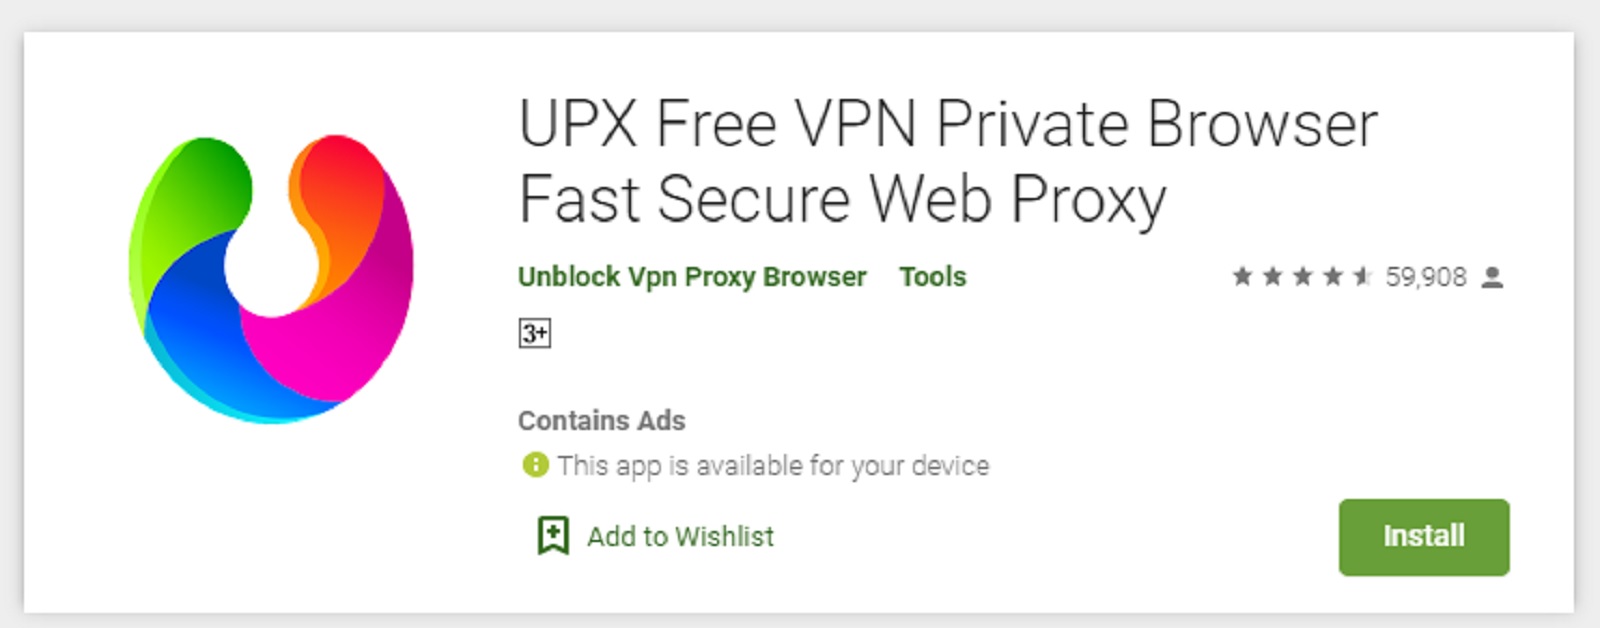 UPX Free VPN Private Browser Fast Secure Web Proxy